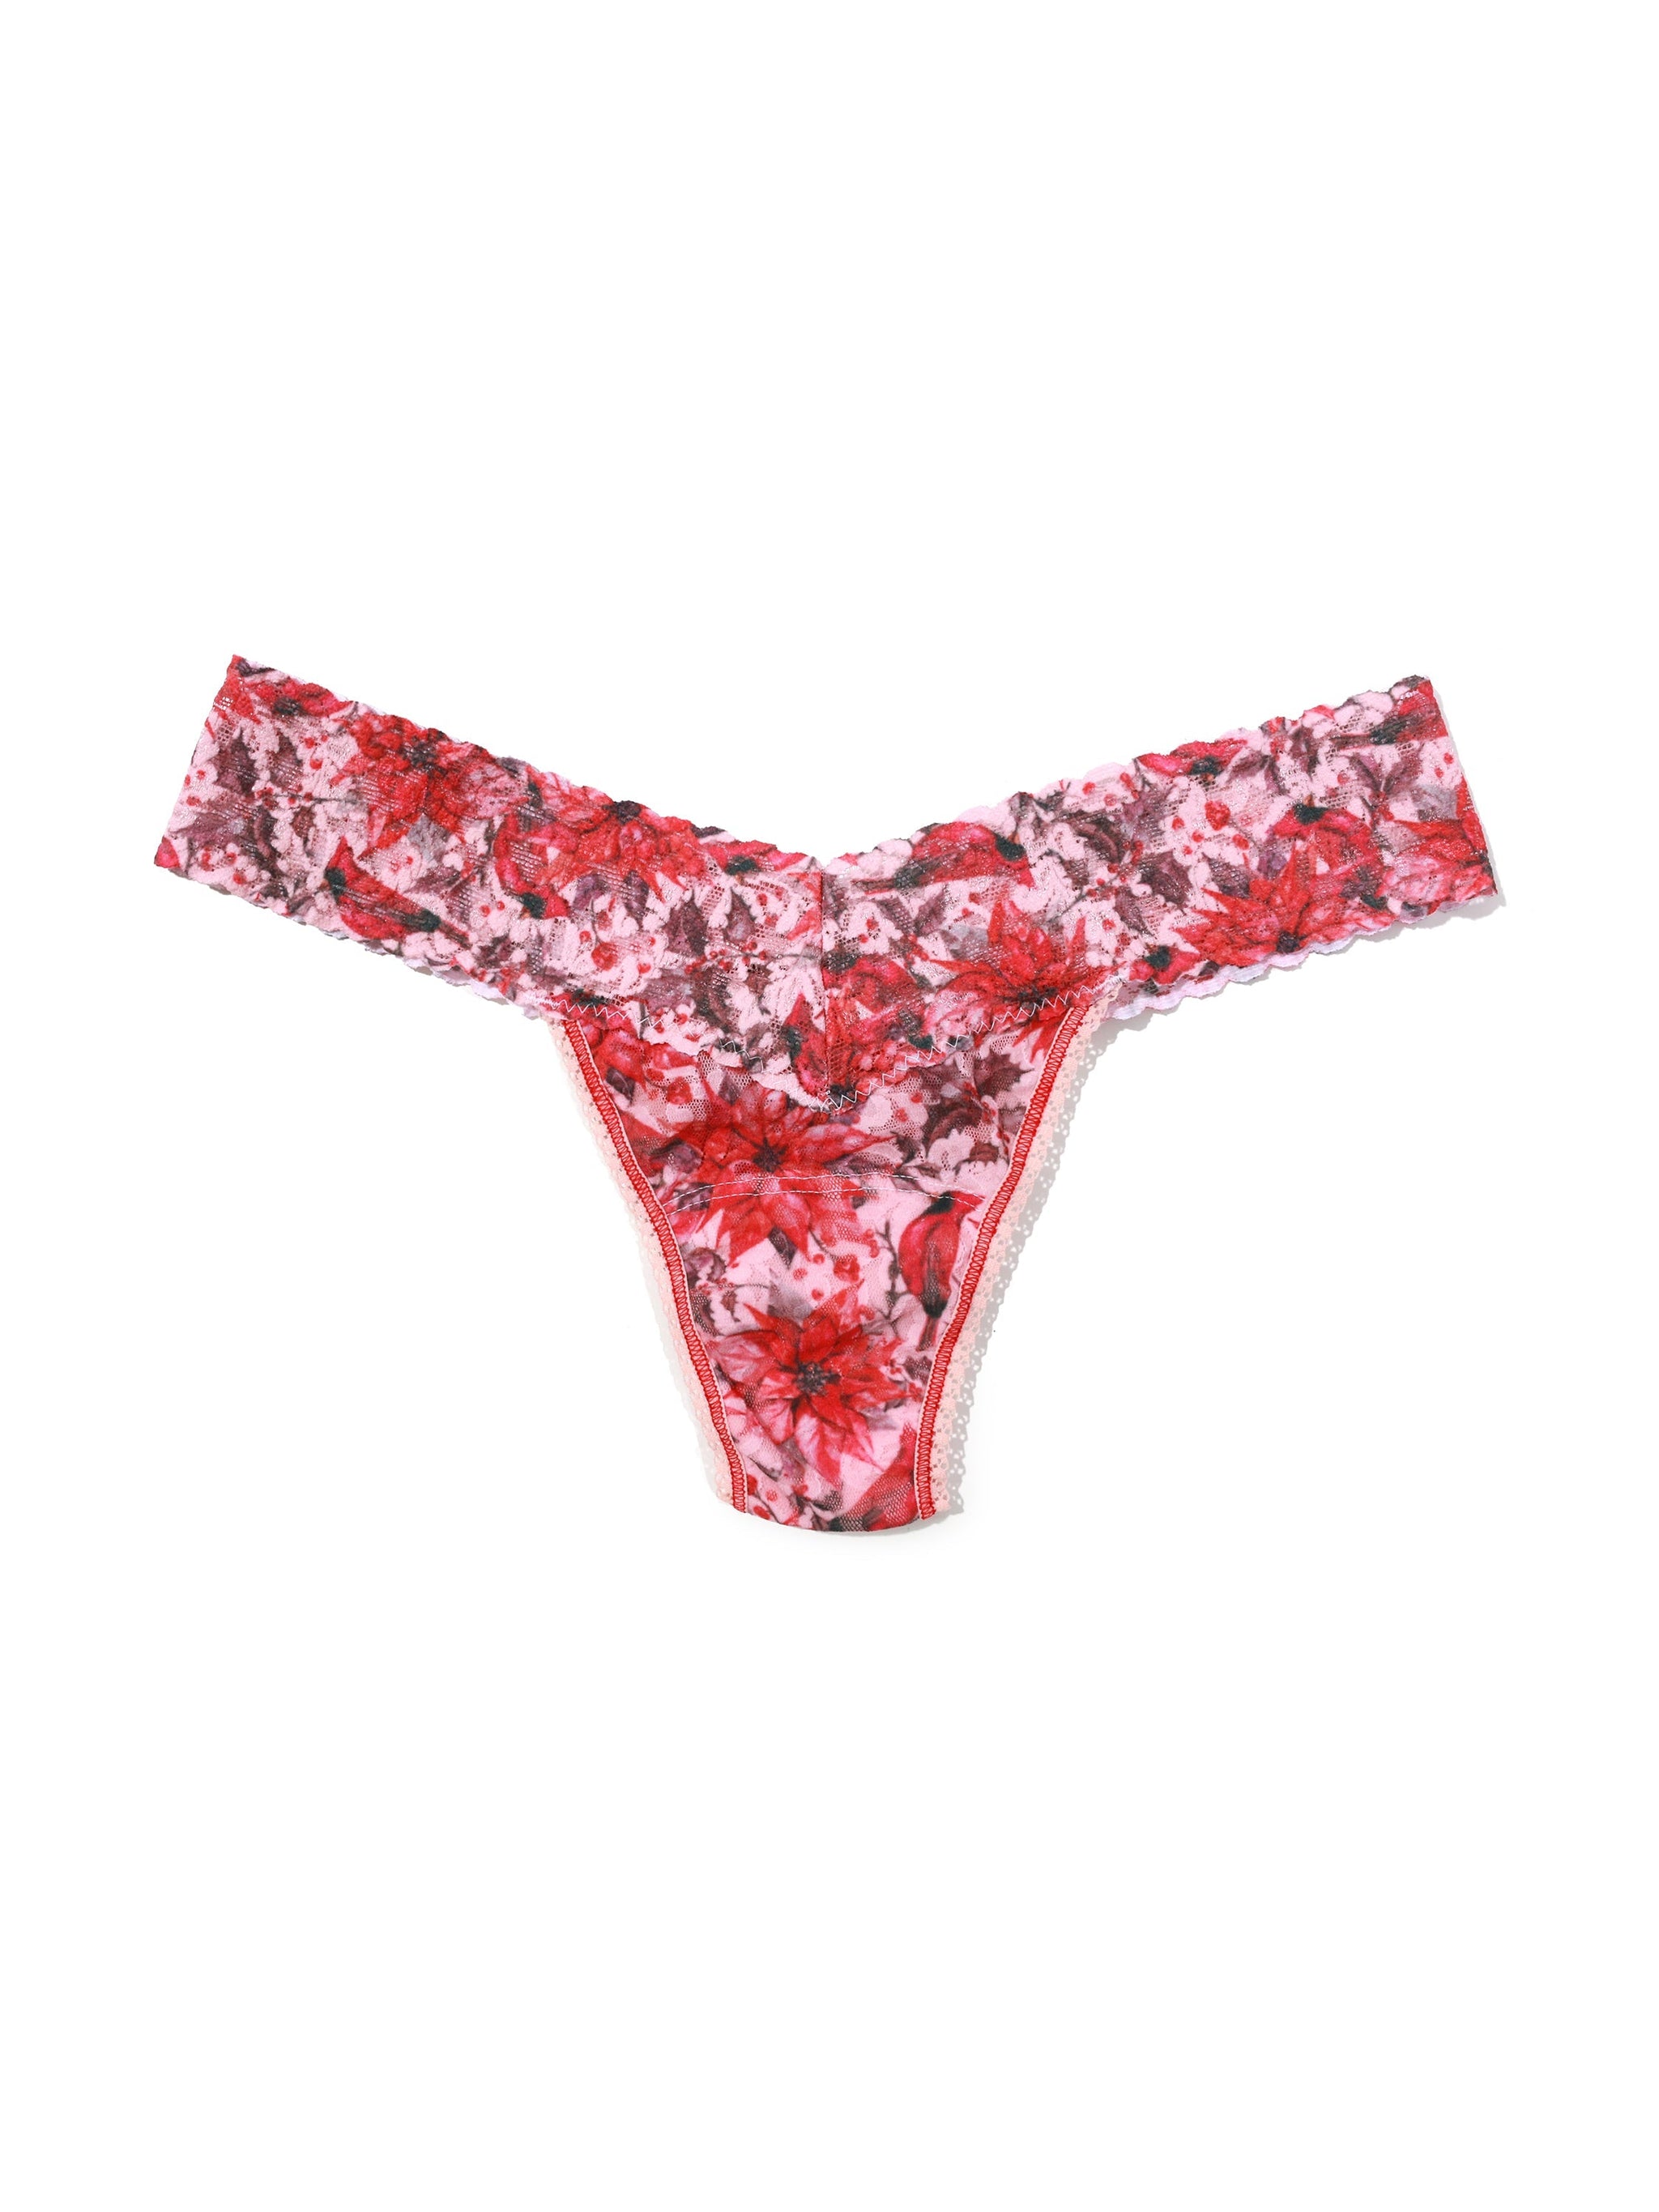 Printed Signature Lace Low Rise Thong Poinsetta Sale